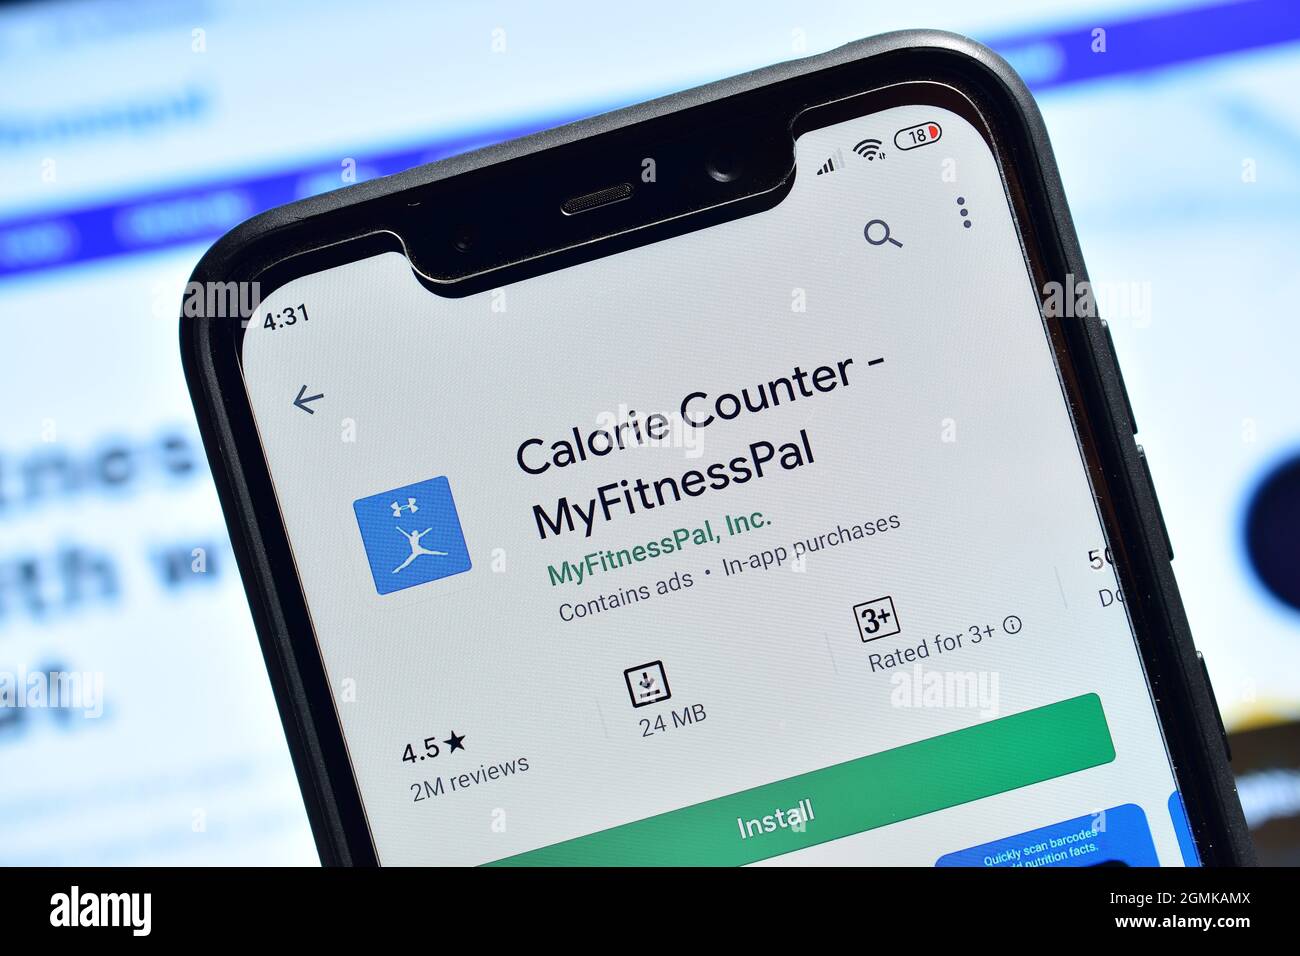 New Delhi, India - February 07, 2020: Calorie Counter My Fitness Pal Application Stock Photo